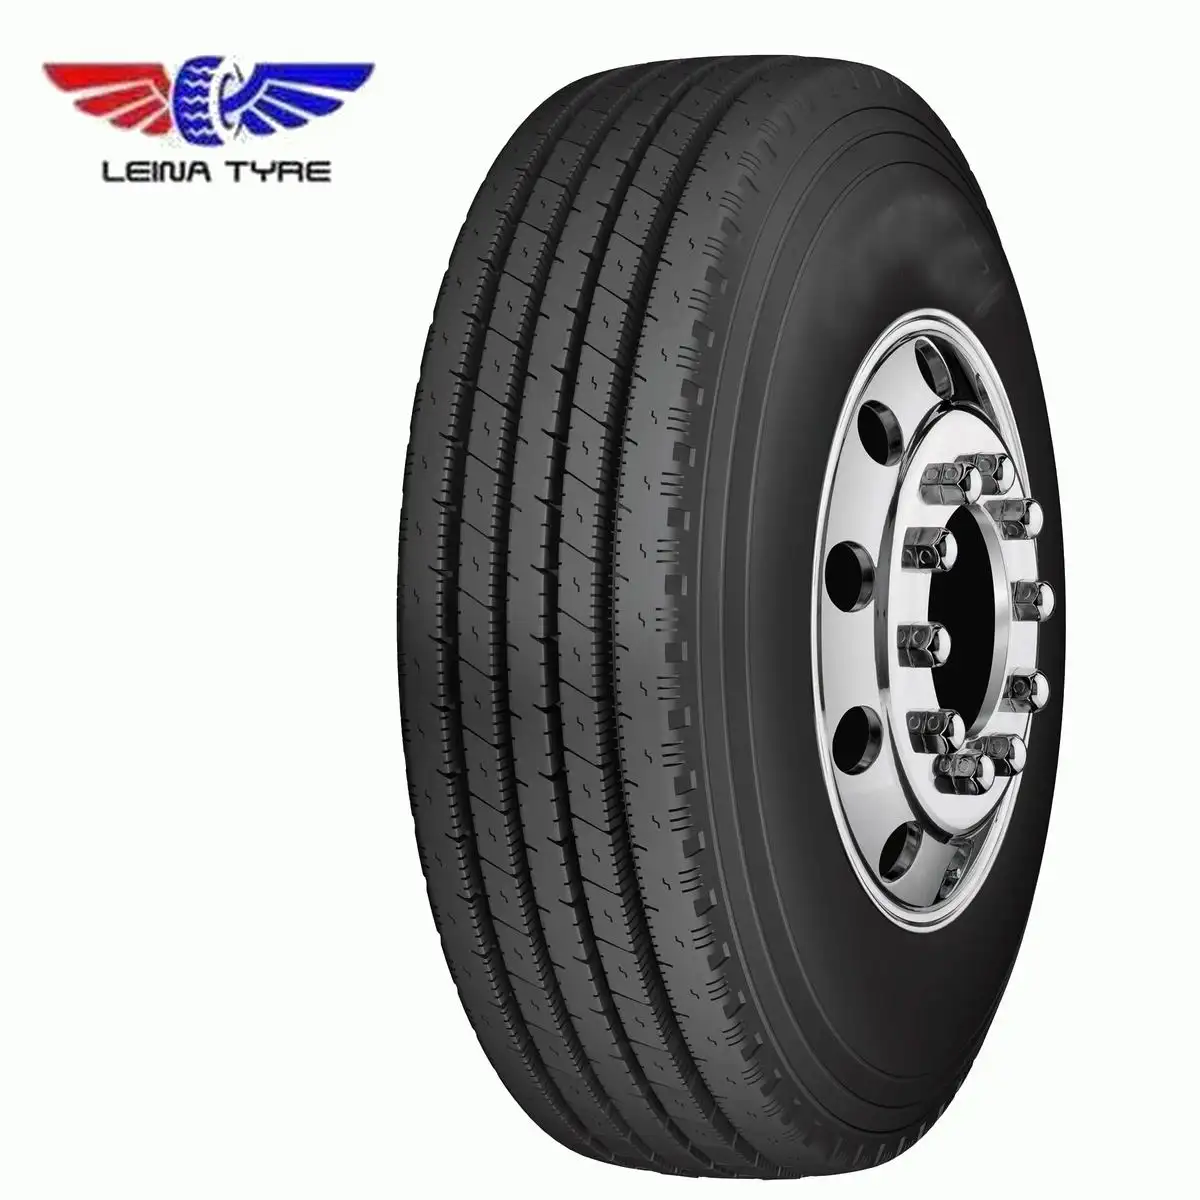 China radial truck and bus tires 11R22.5 295/75R22.5 and truck steel wheel rims 22.5X8.25